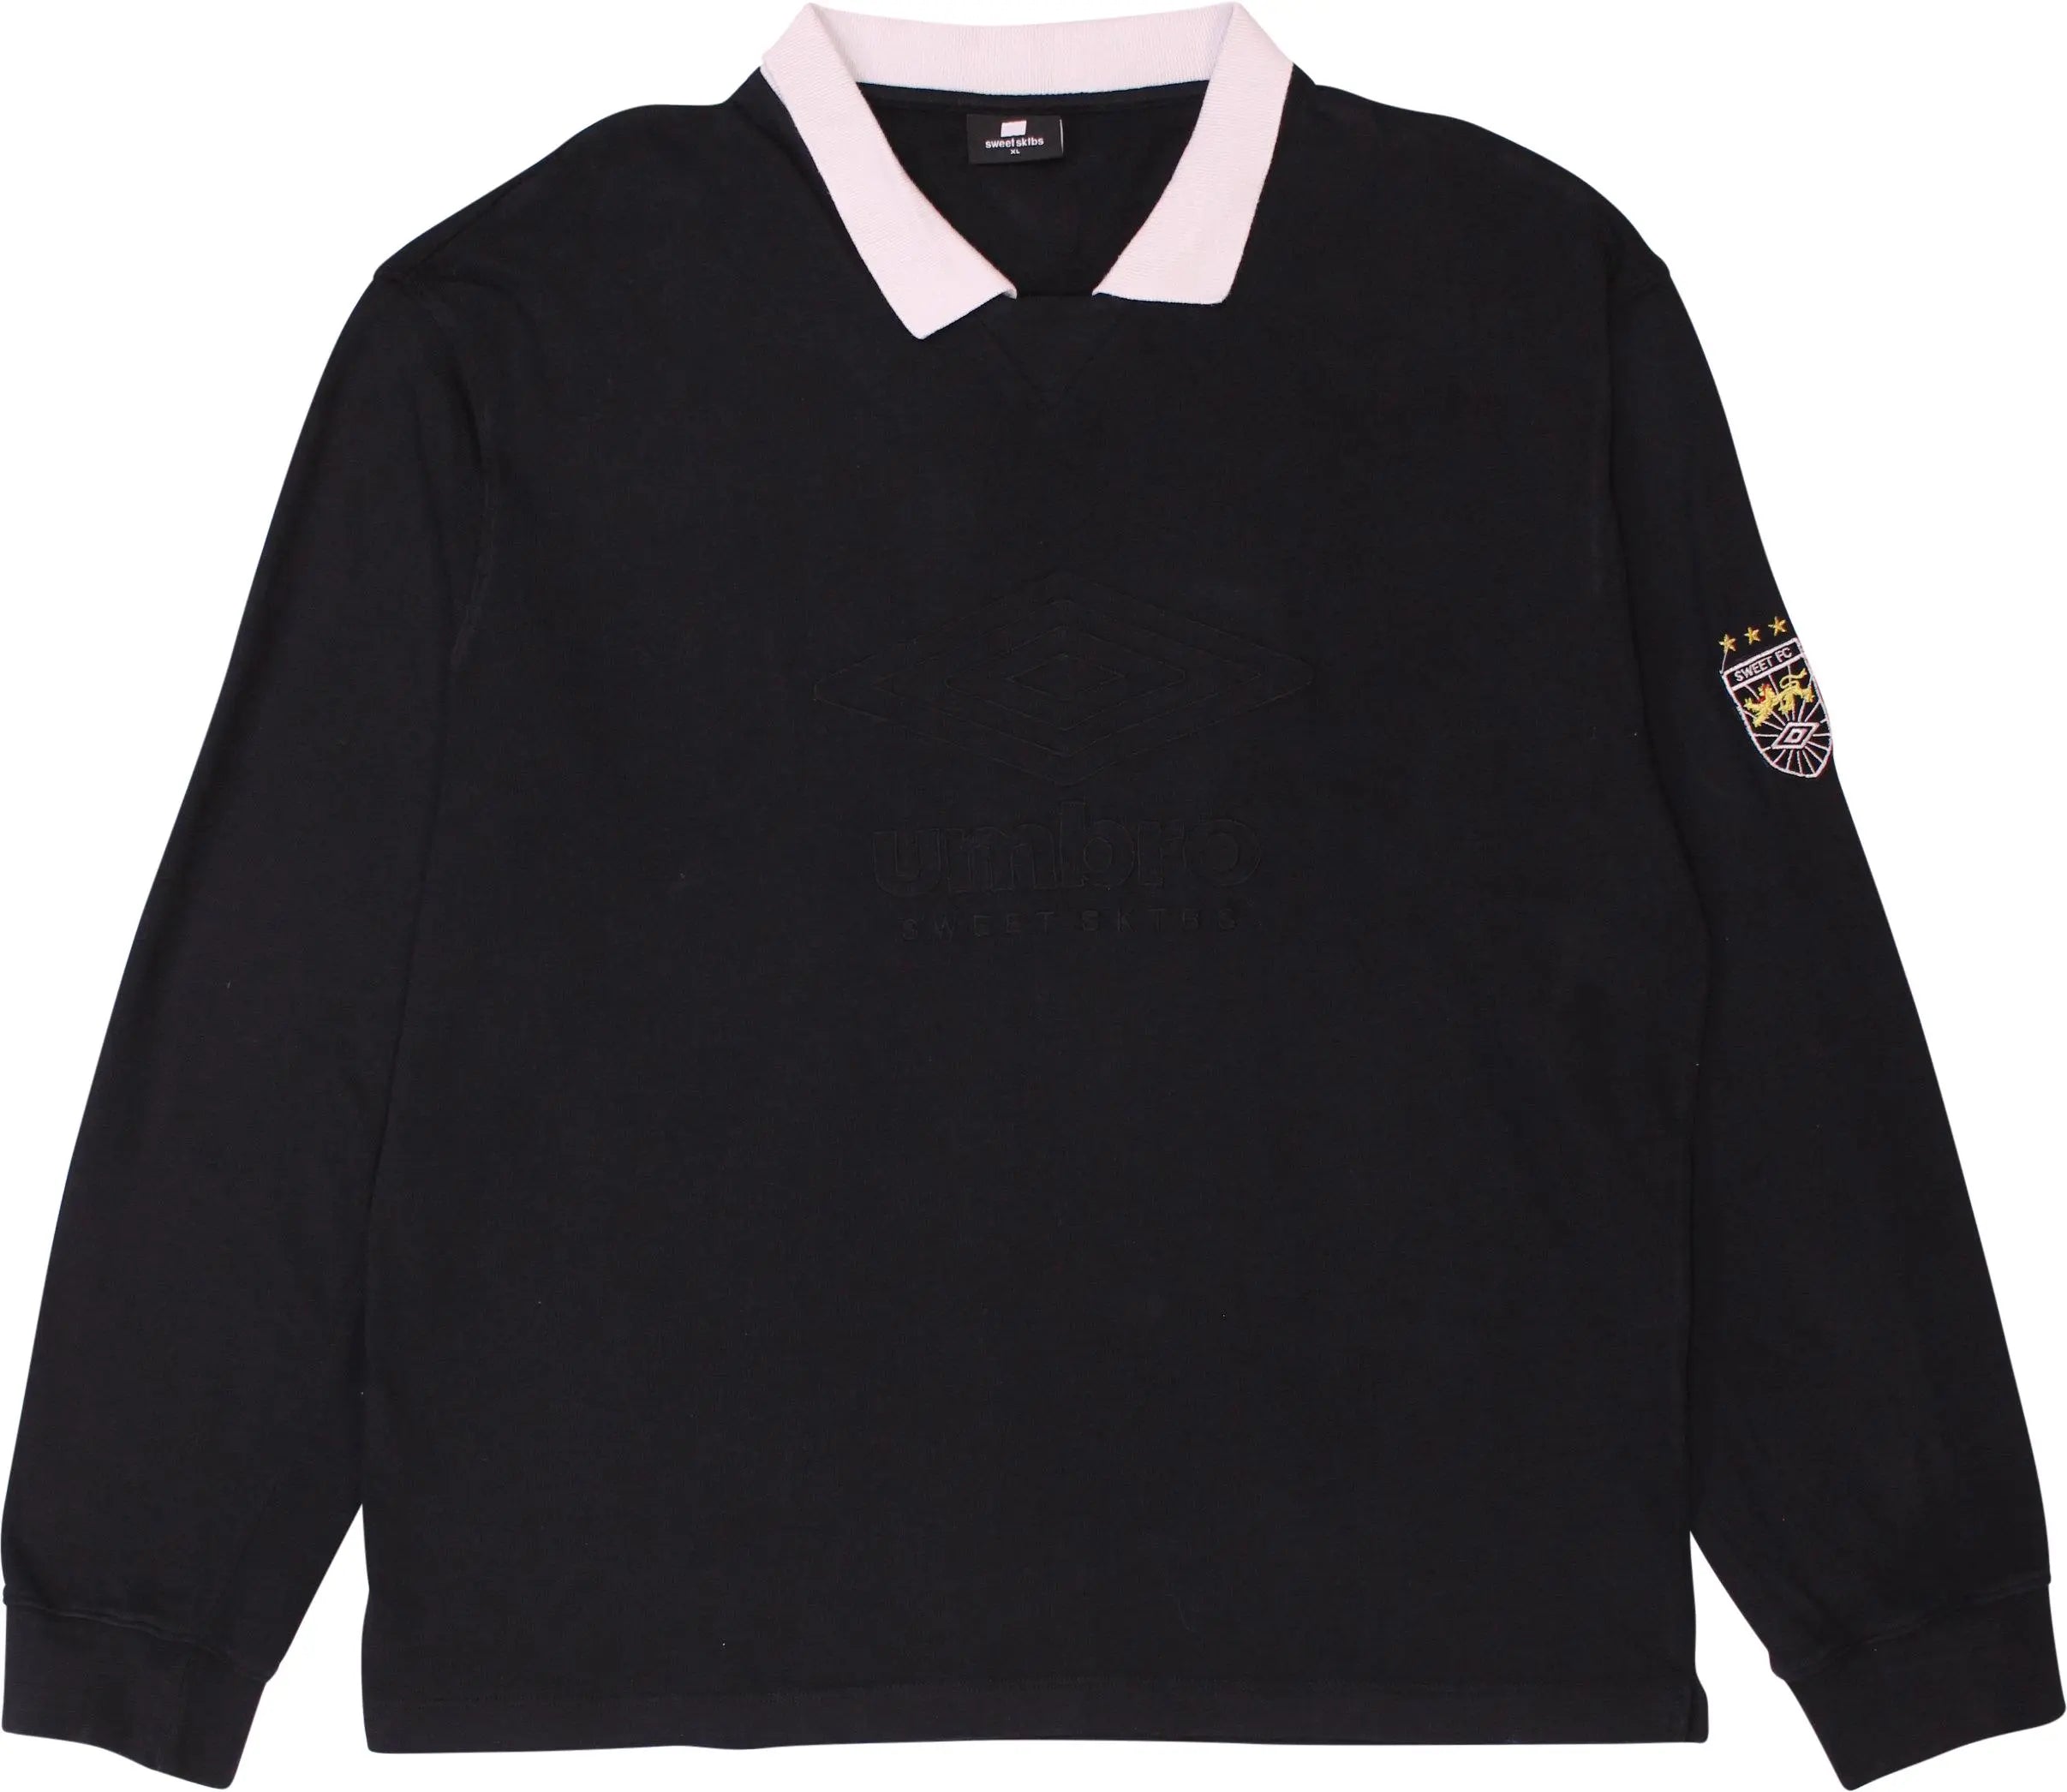 Umbro - Longsleeve Shirt by - Sweet x Umbro Black- ThriftTale.com - Vintage and second handclothing